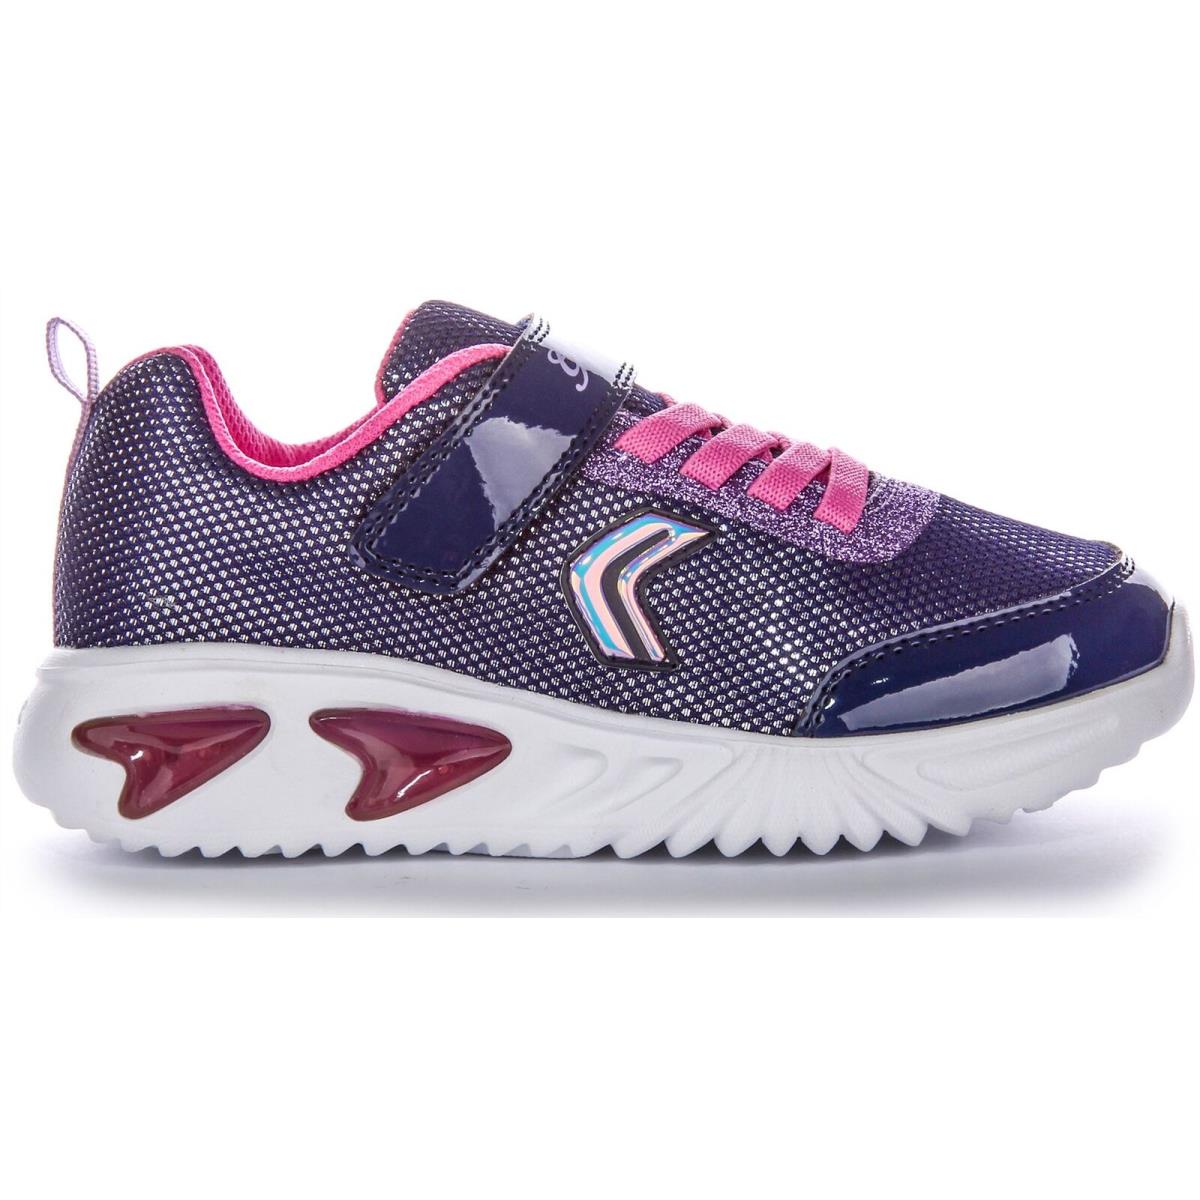 Geox J Assister G. A Aesthetic Sporty Light Up Shoe Navy Pink US 0.5C - 13.5C